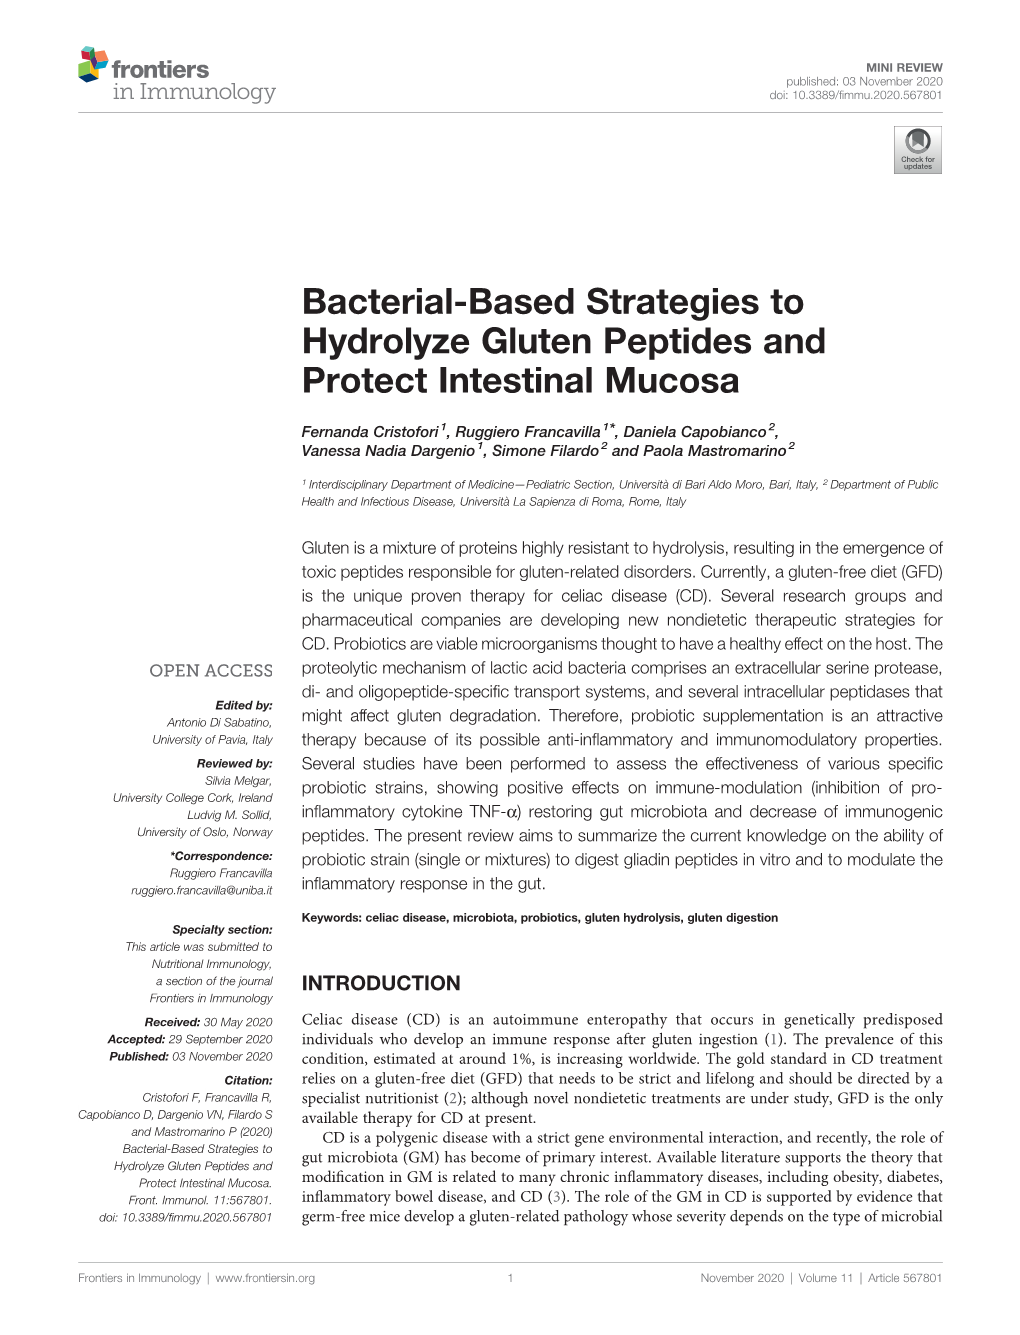 Bacterial-Based Strategies to Hydrolyze Gluten Peptides and Protect Intestinal Mucosa